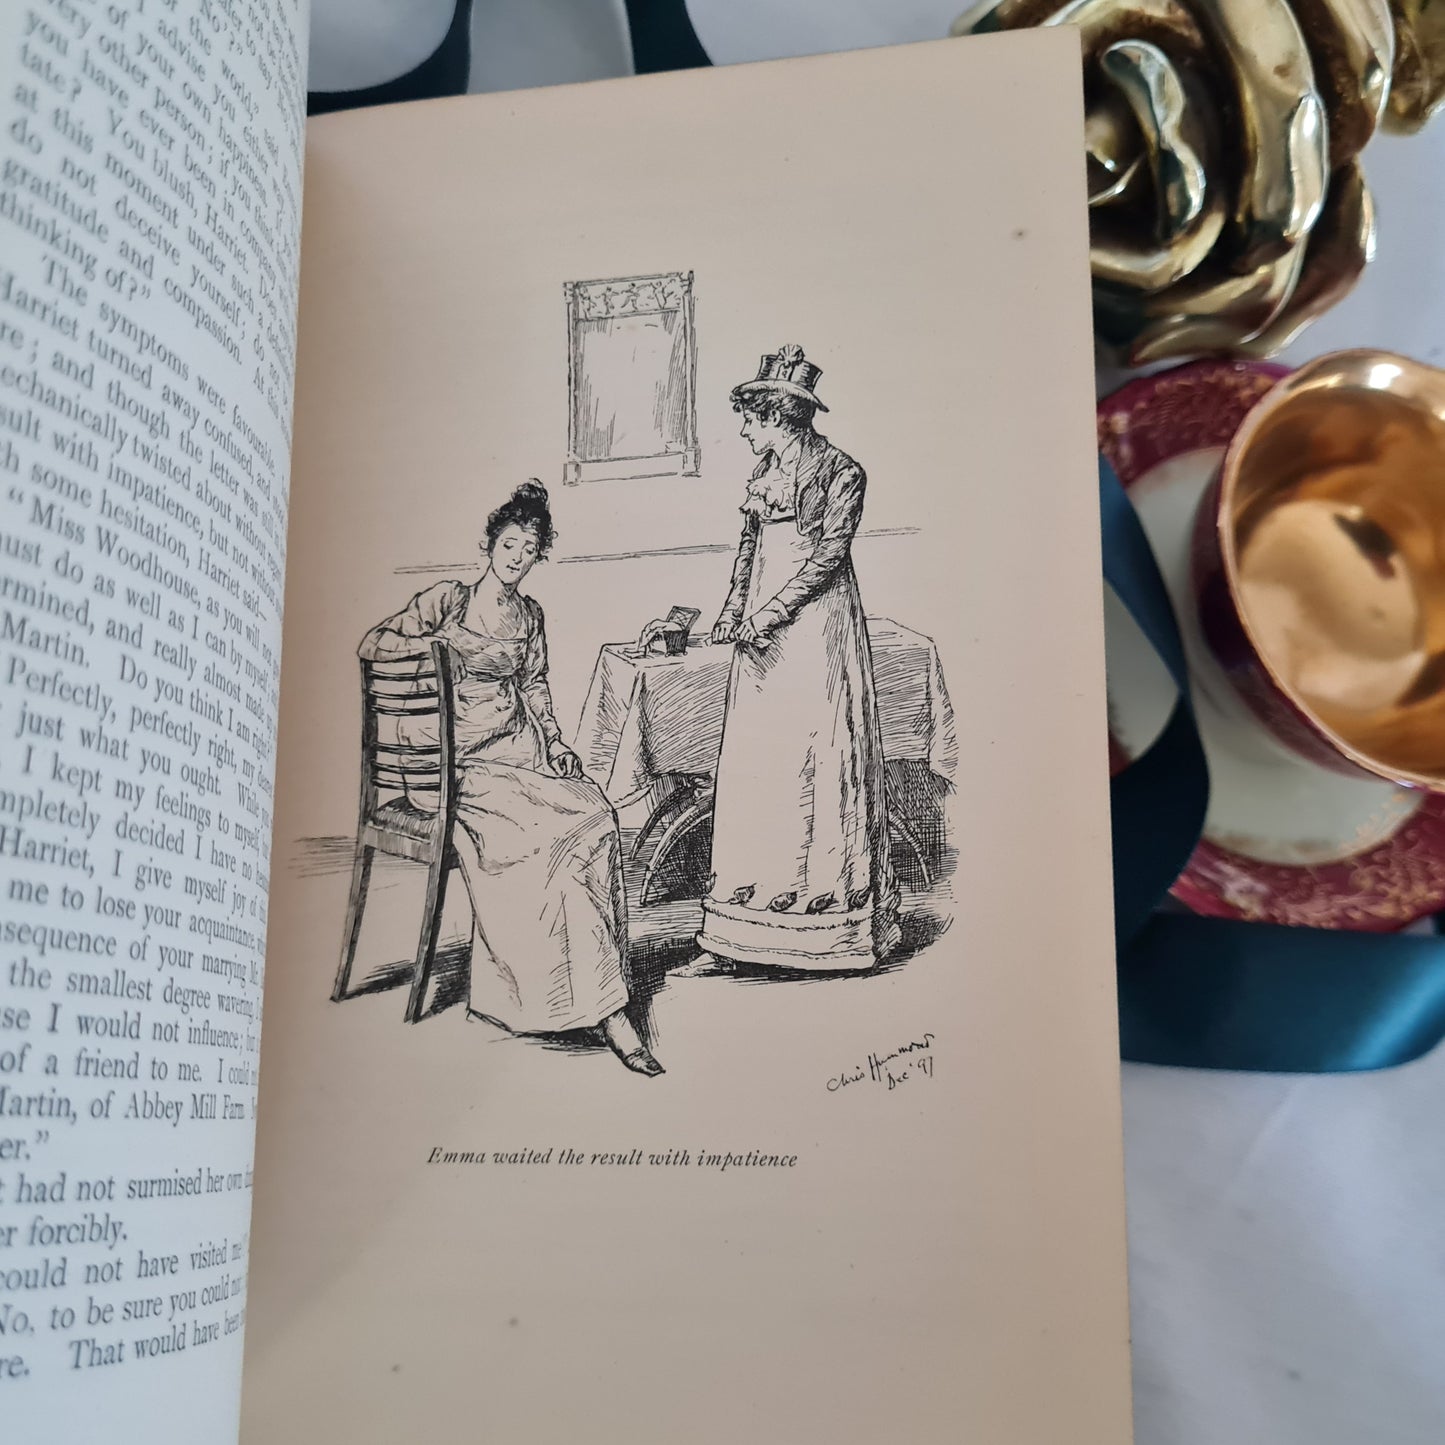 1898 Emma by Jane Austen / 1st Edition Thus / Highly Sought After Decorative Antique Edition / Illustrated by Hammond / Very Good Condition